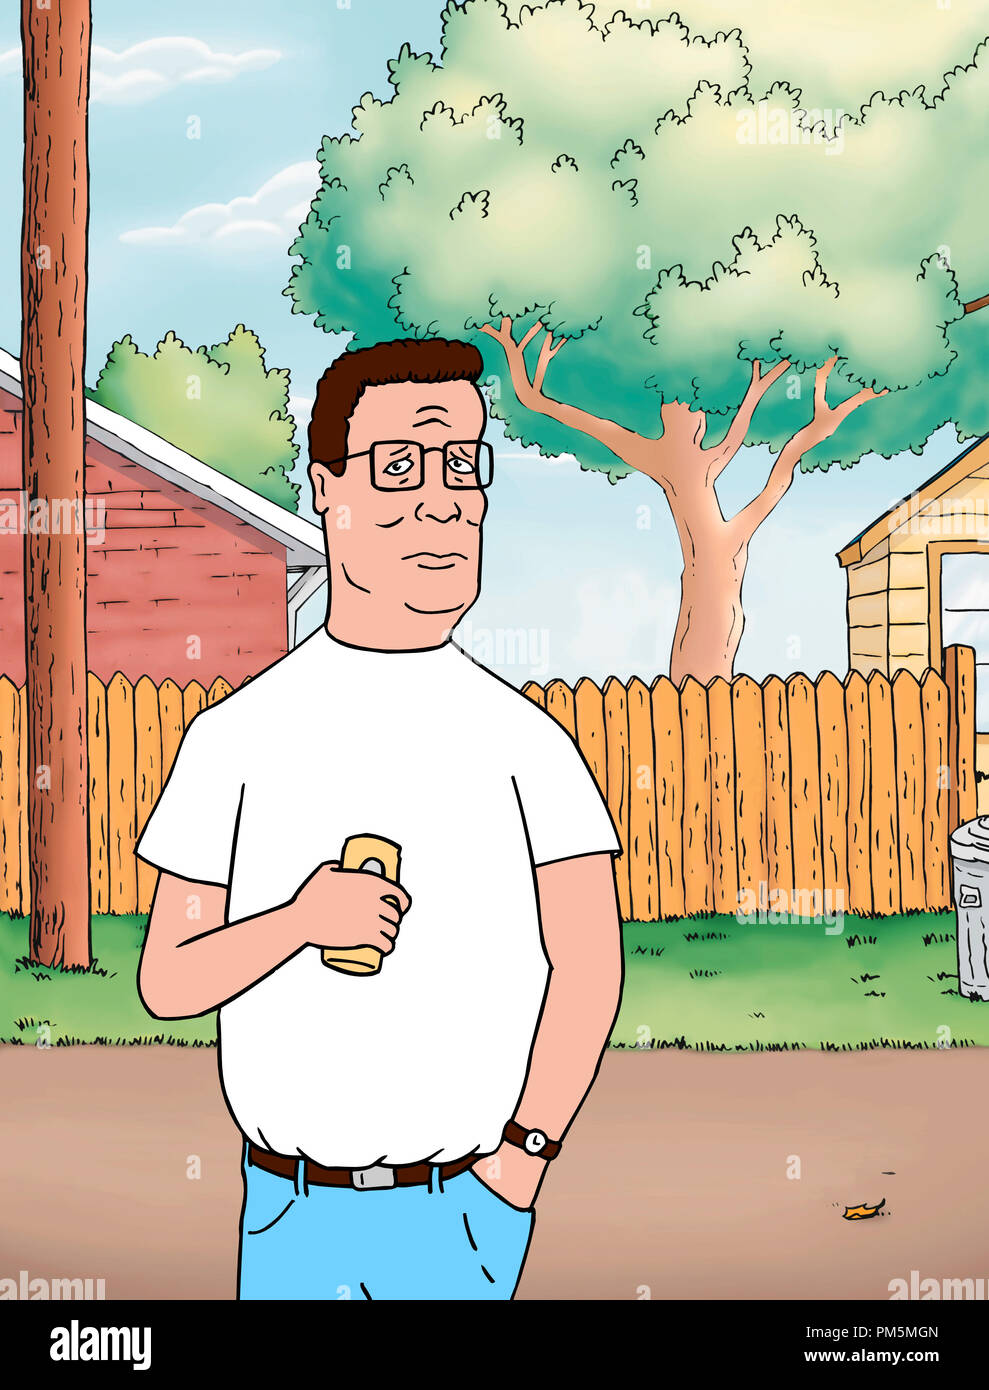 Hank hill images